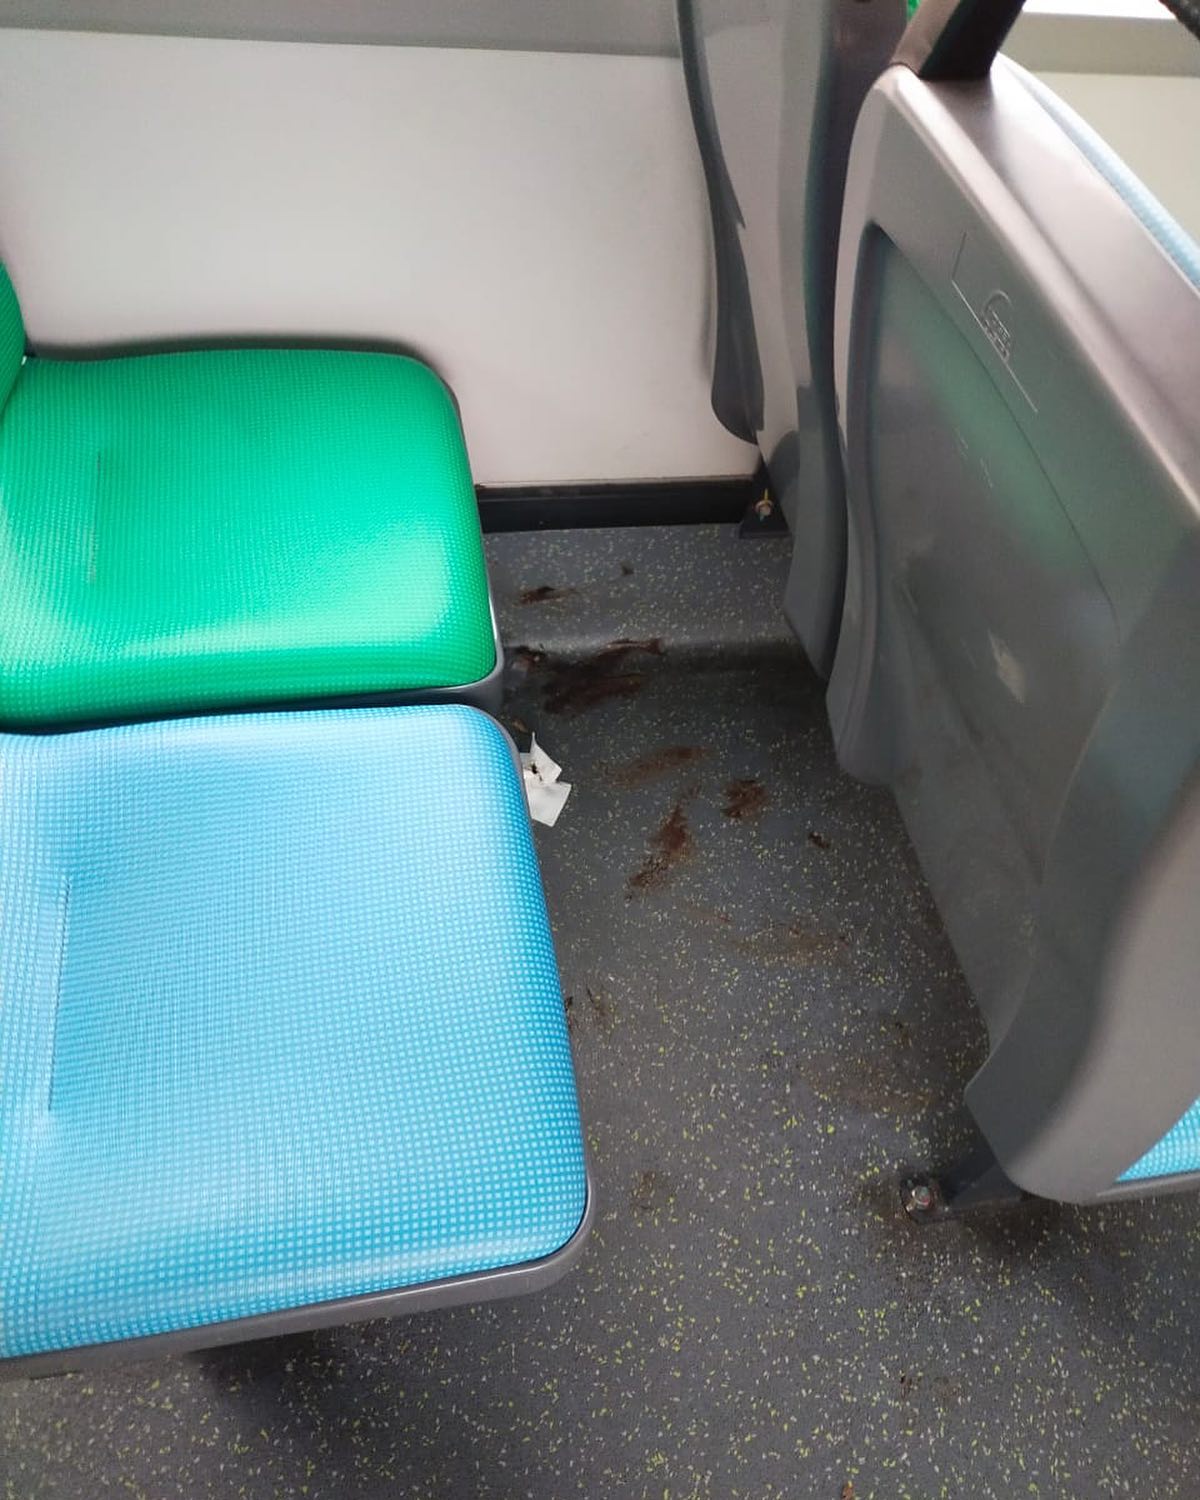 RapidKL claims to have found human feces smeared on the passenger footwell of one of their buses. Image credit: RapidKL